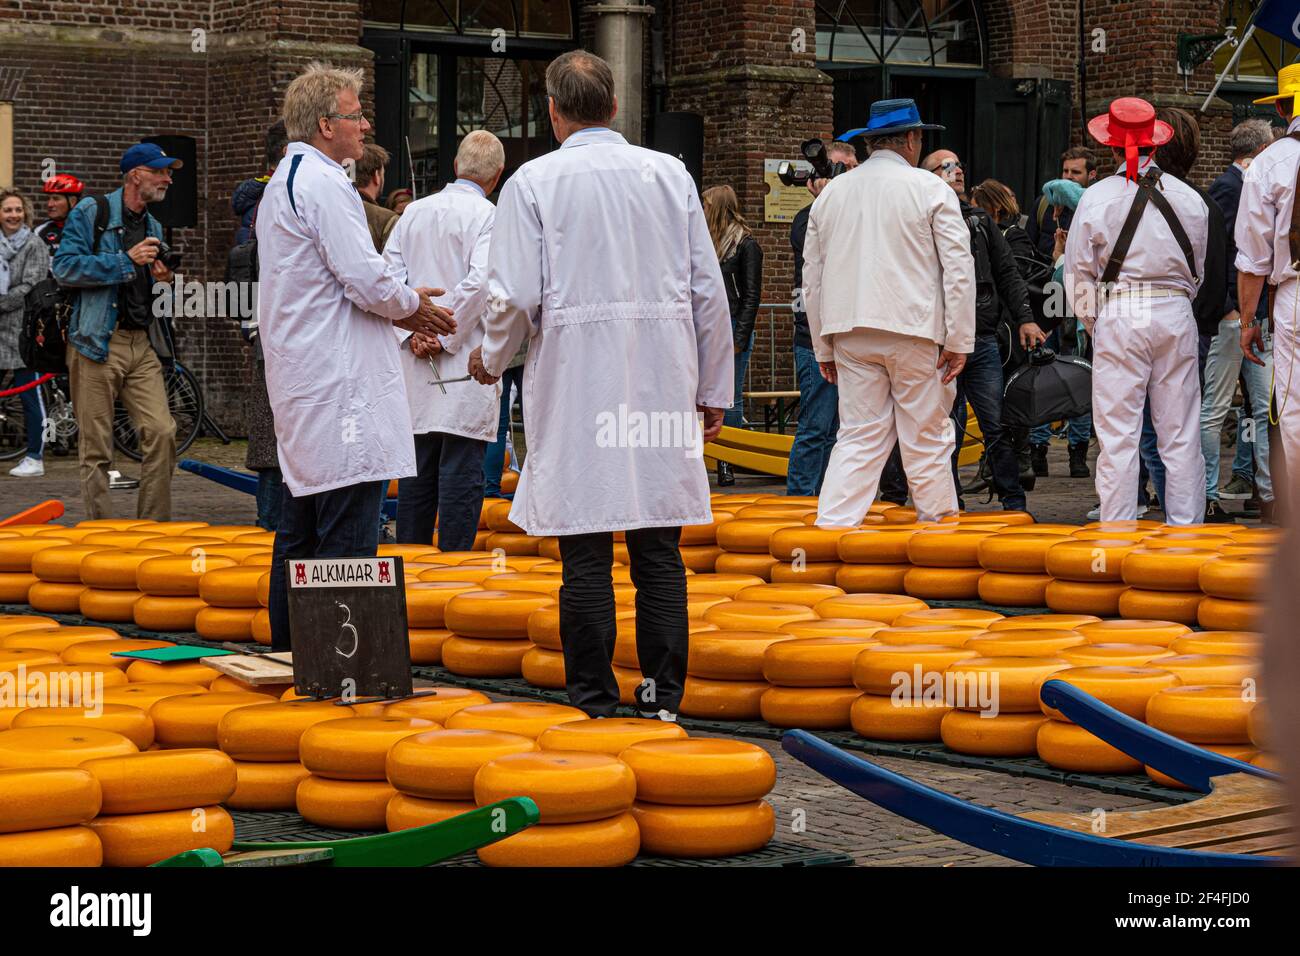 Alkmaar, Netherlands; May 18, 2018: Cheese Market the specialists Stock Photo